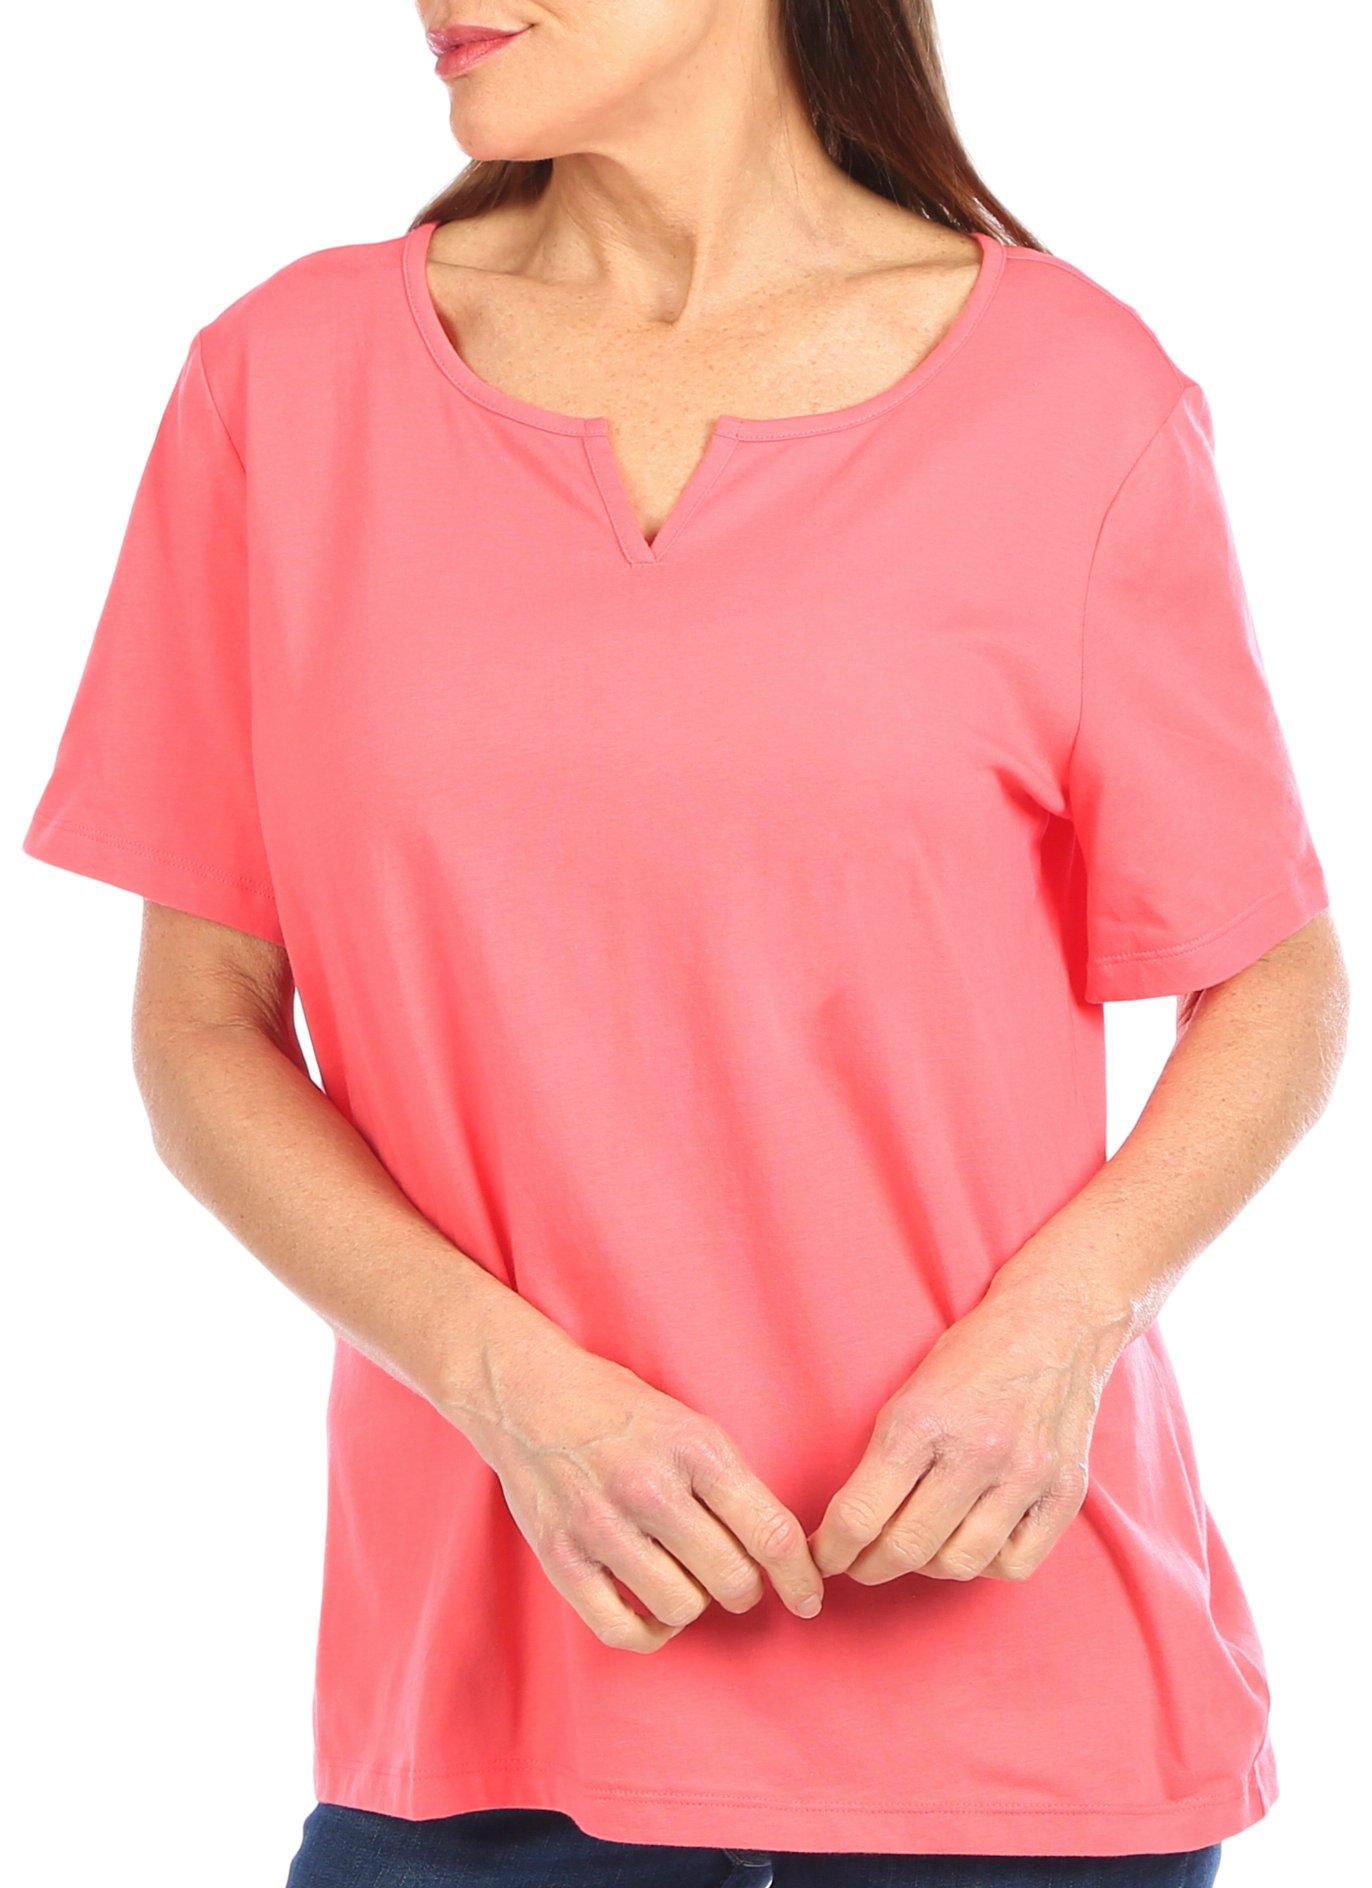 Coral Bay Womens Solid Split Neck Short Sleeve